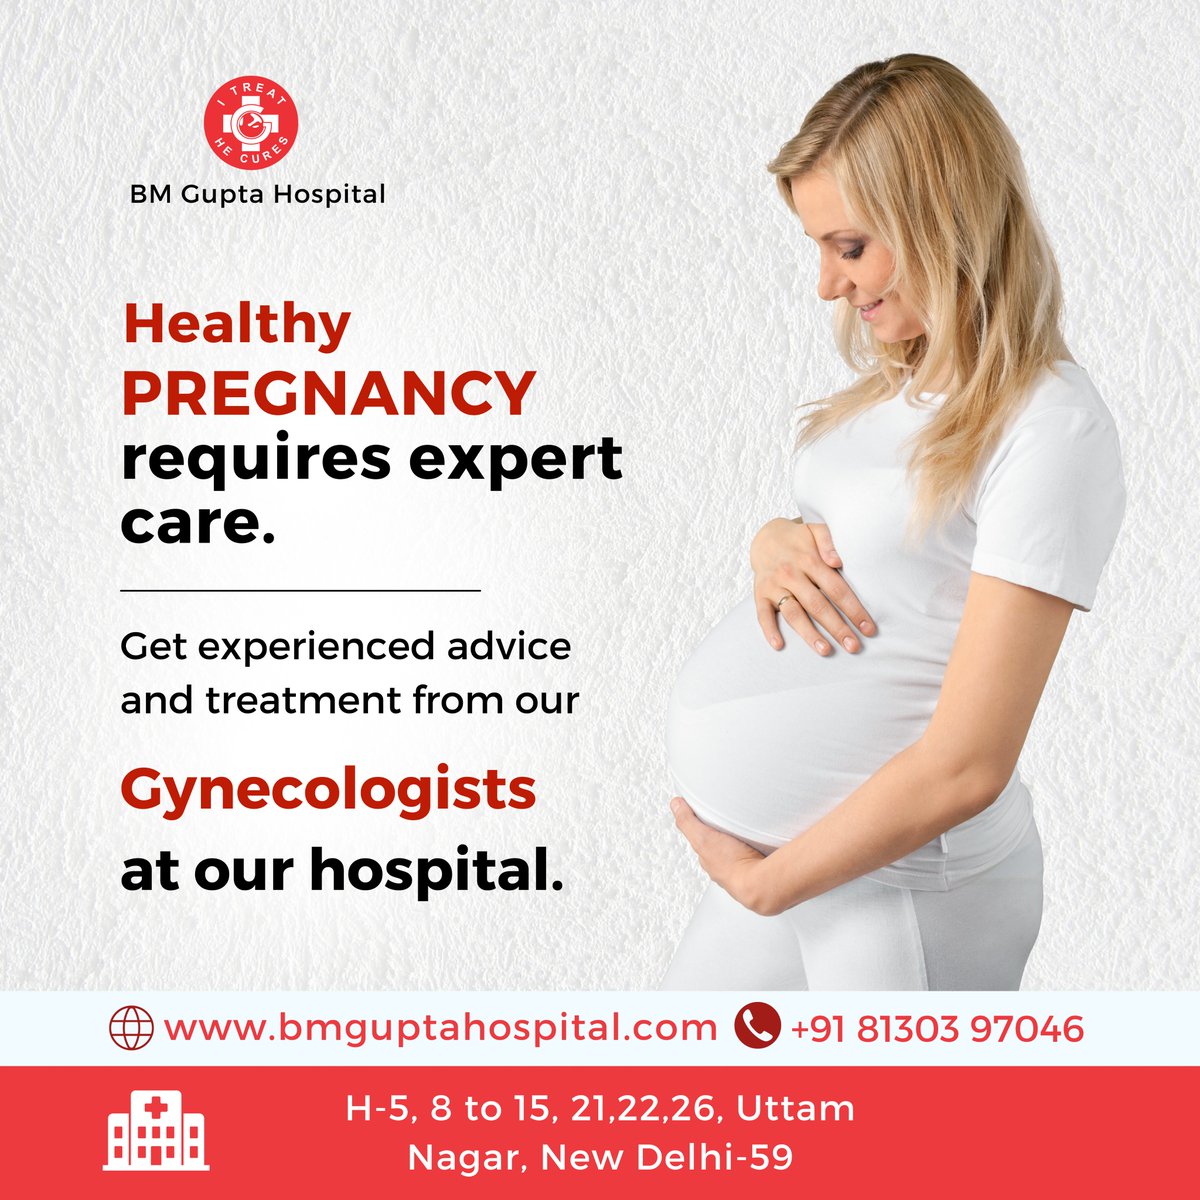 For a Healthy Pregnancy, Choose Expert Care. For more info Call us at 91 81303 97046 Mail us: bmguptagnh@gmail.com #BMGH #BMGuptaHospital #health #healthcare #gynecologist #HealthyPregnancy #ExpertGynecologists #PregnancyCare #WelcomeBaby #WomensHealth #PrenatalCare